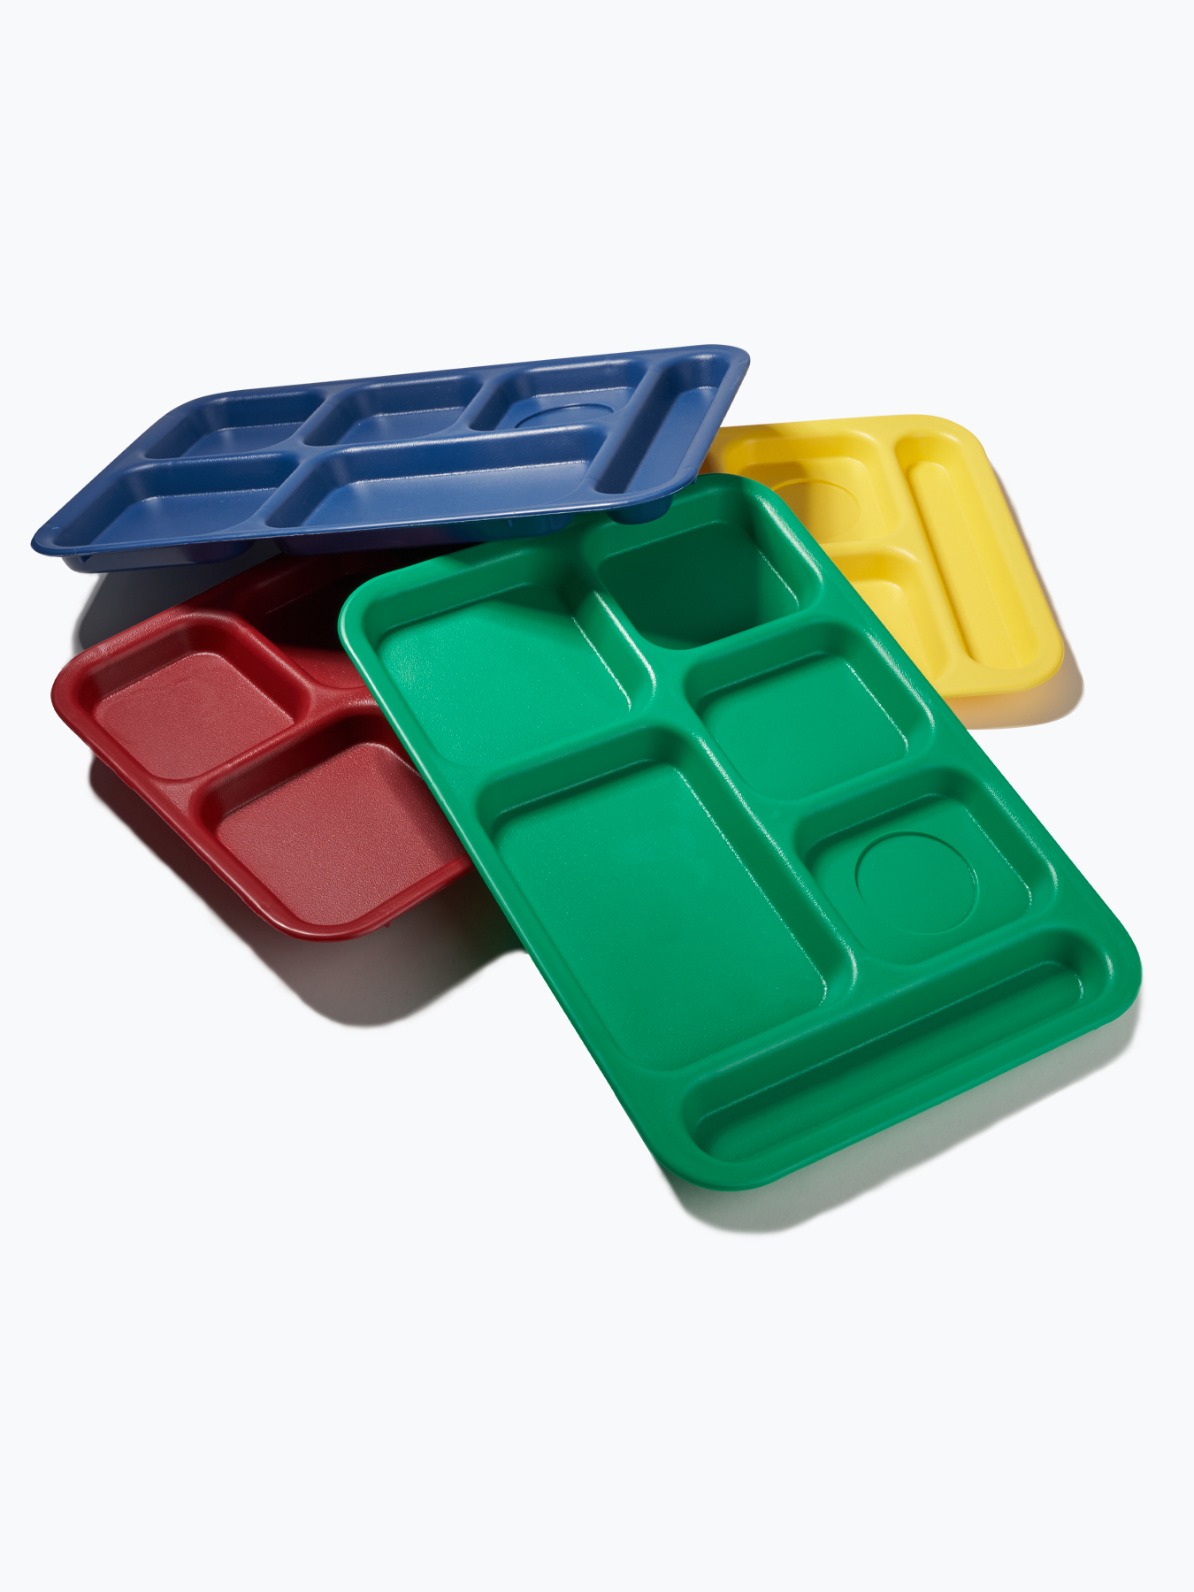 [Cambro] COMPERTMENT TRAY (4 COLORS)